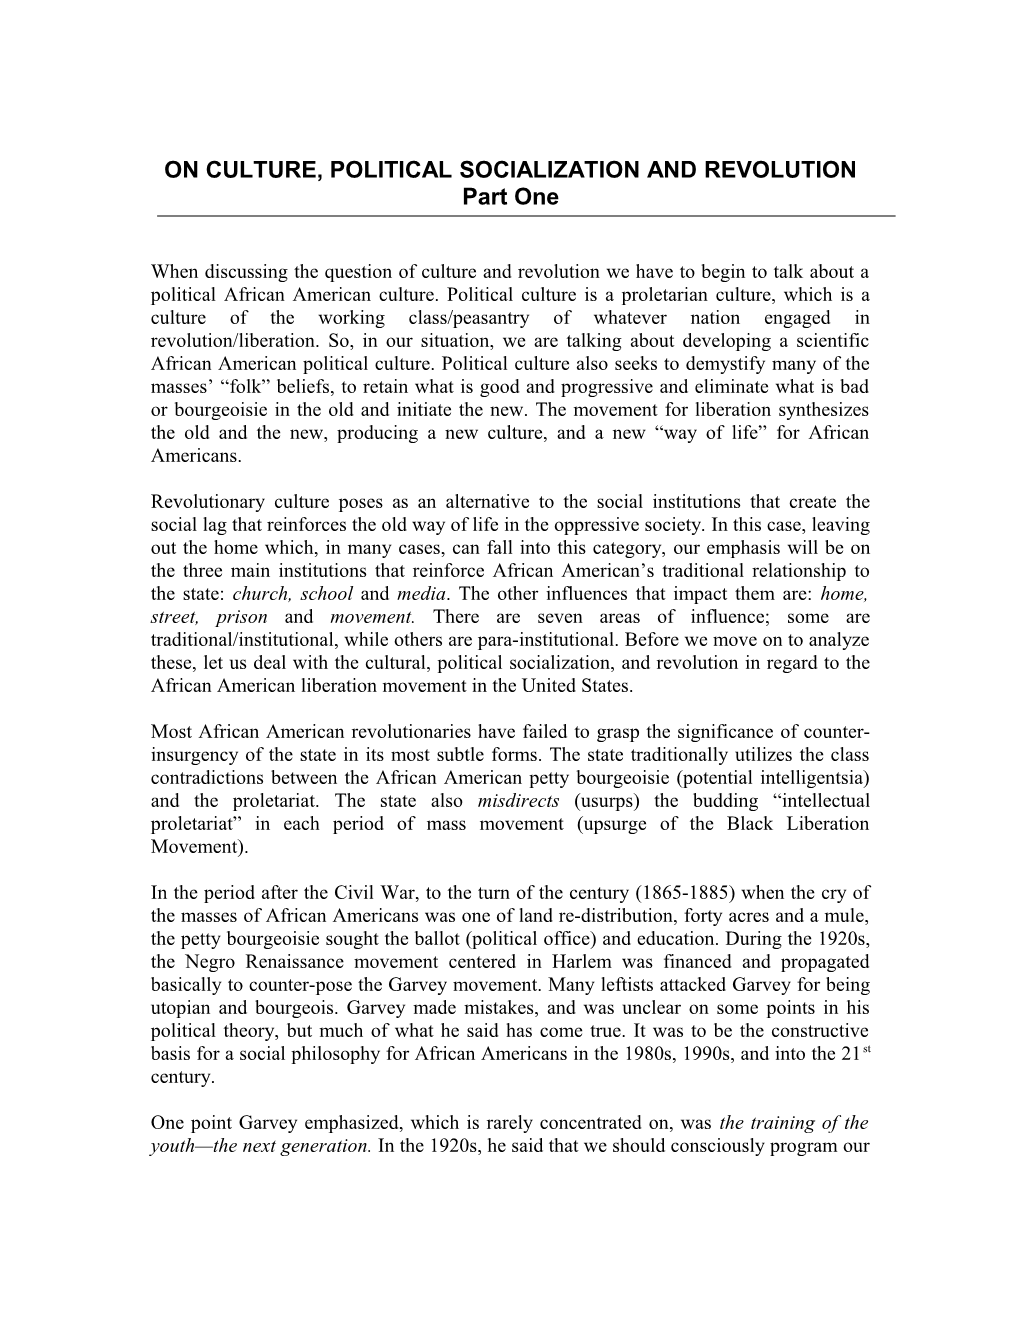 On Culture, Political Socialization and Revolution